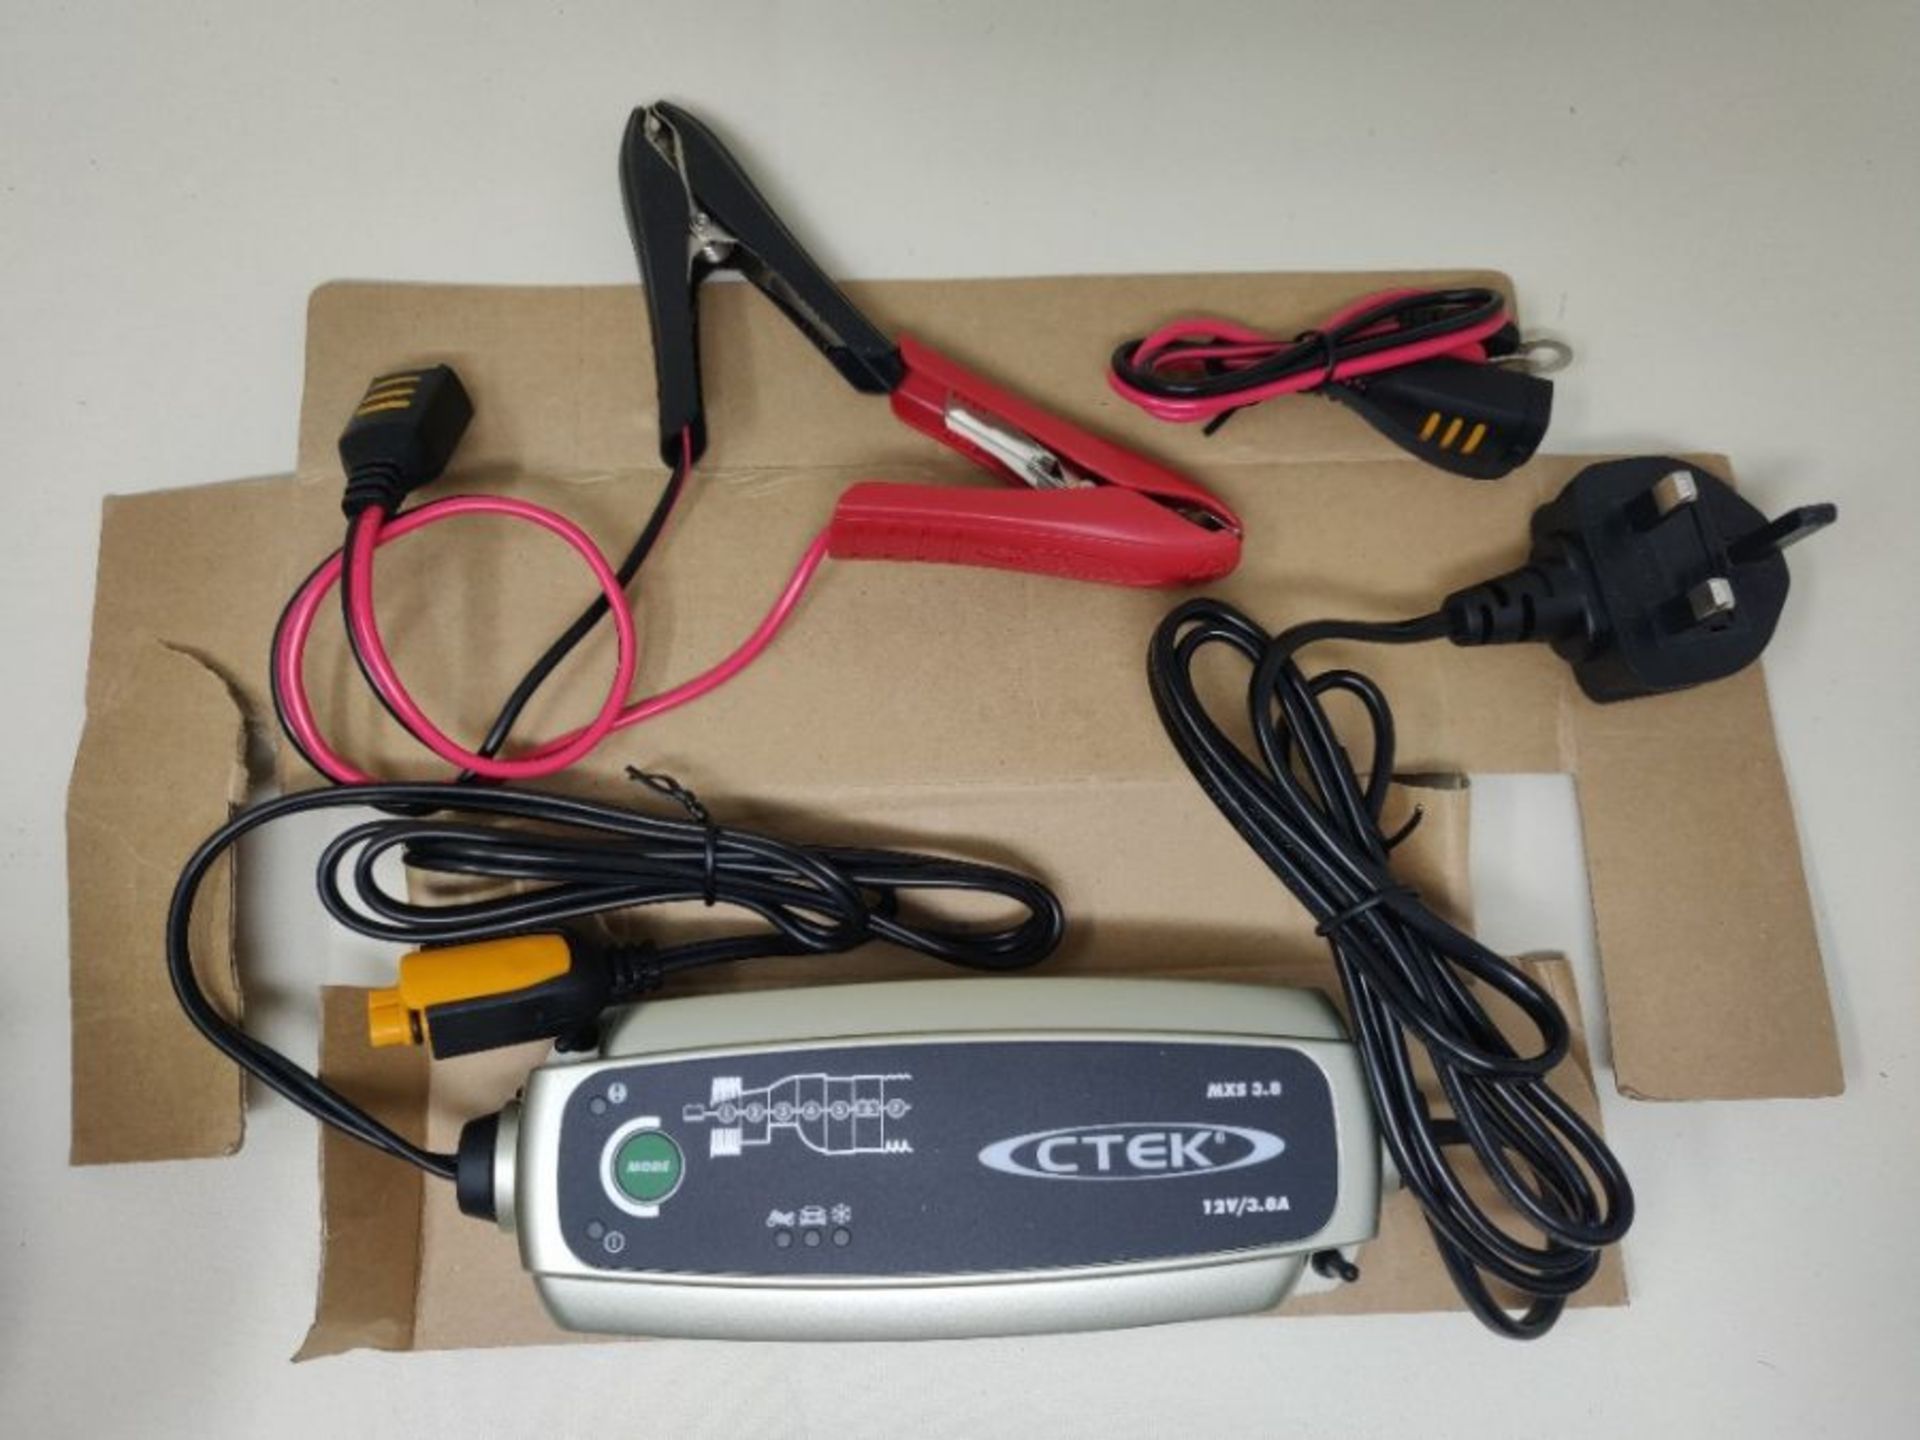 RRP £65.00 CTEK MXS 3.8 Automatic Battery Charger (Charges & Maintains Car and Motorcycle Batteri - Image 3 of 3